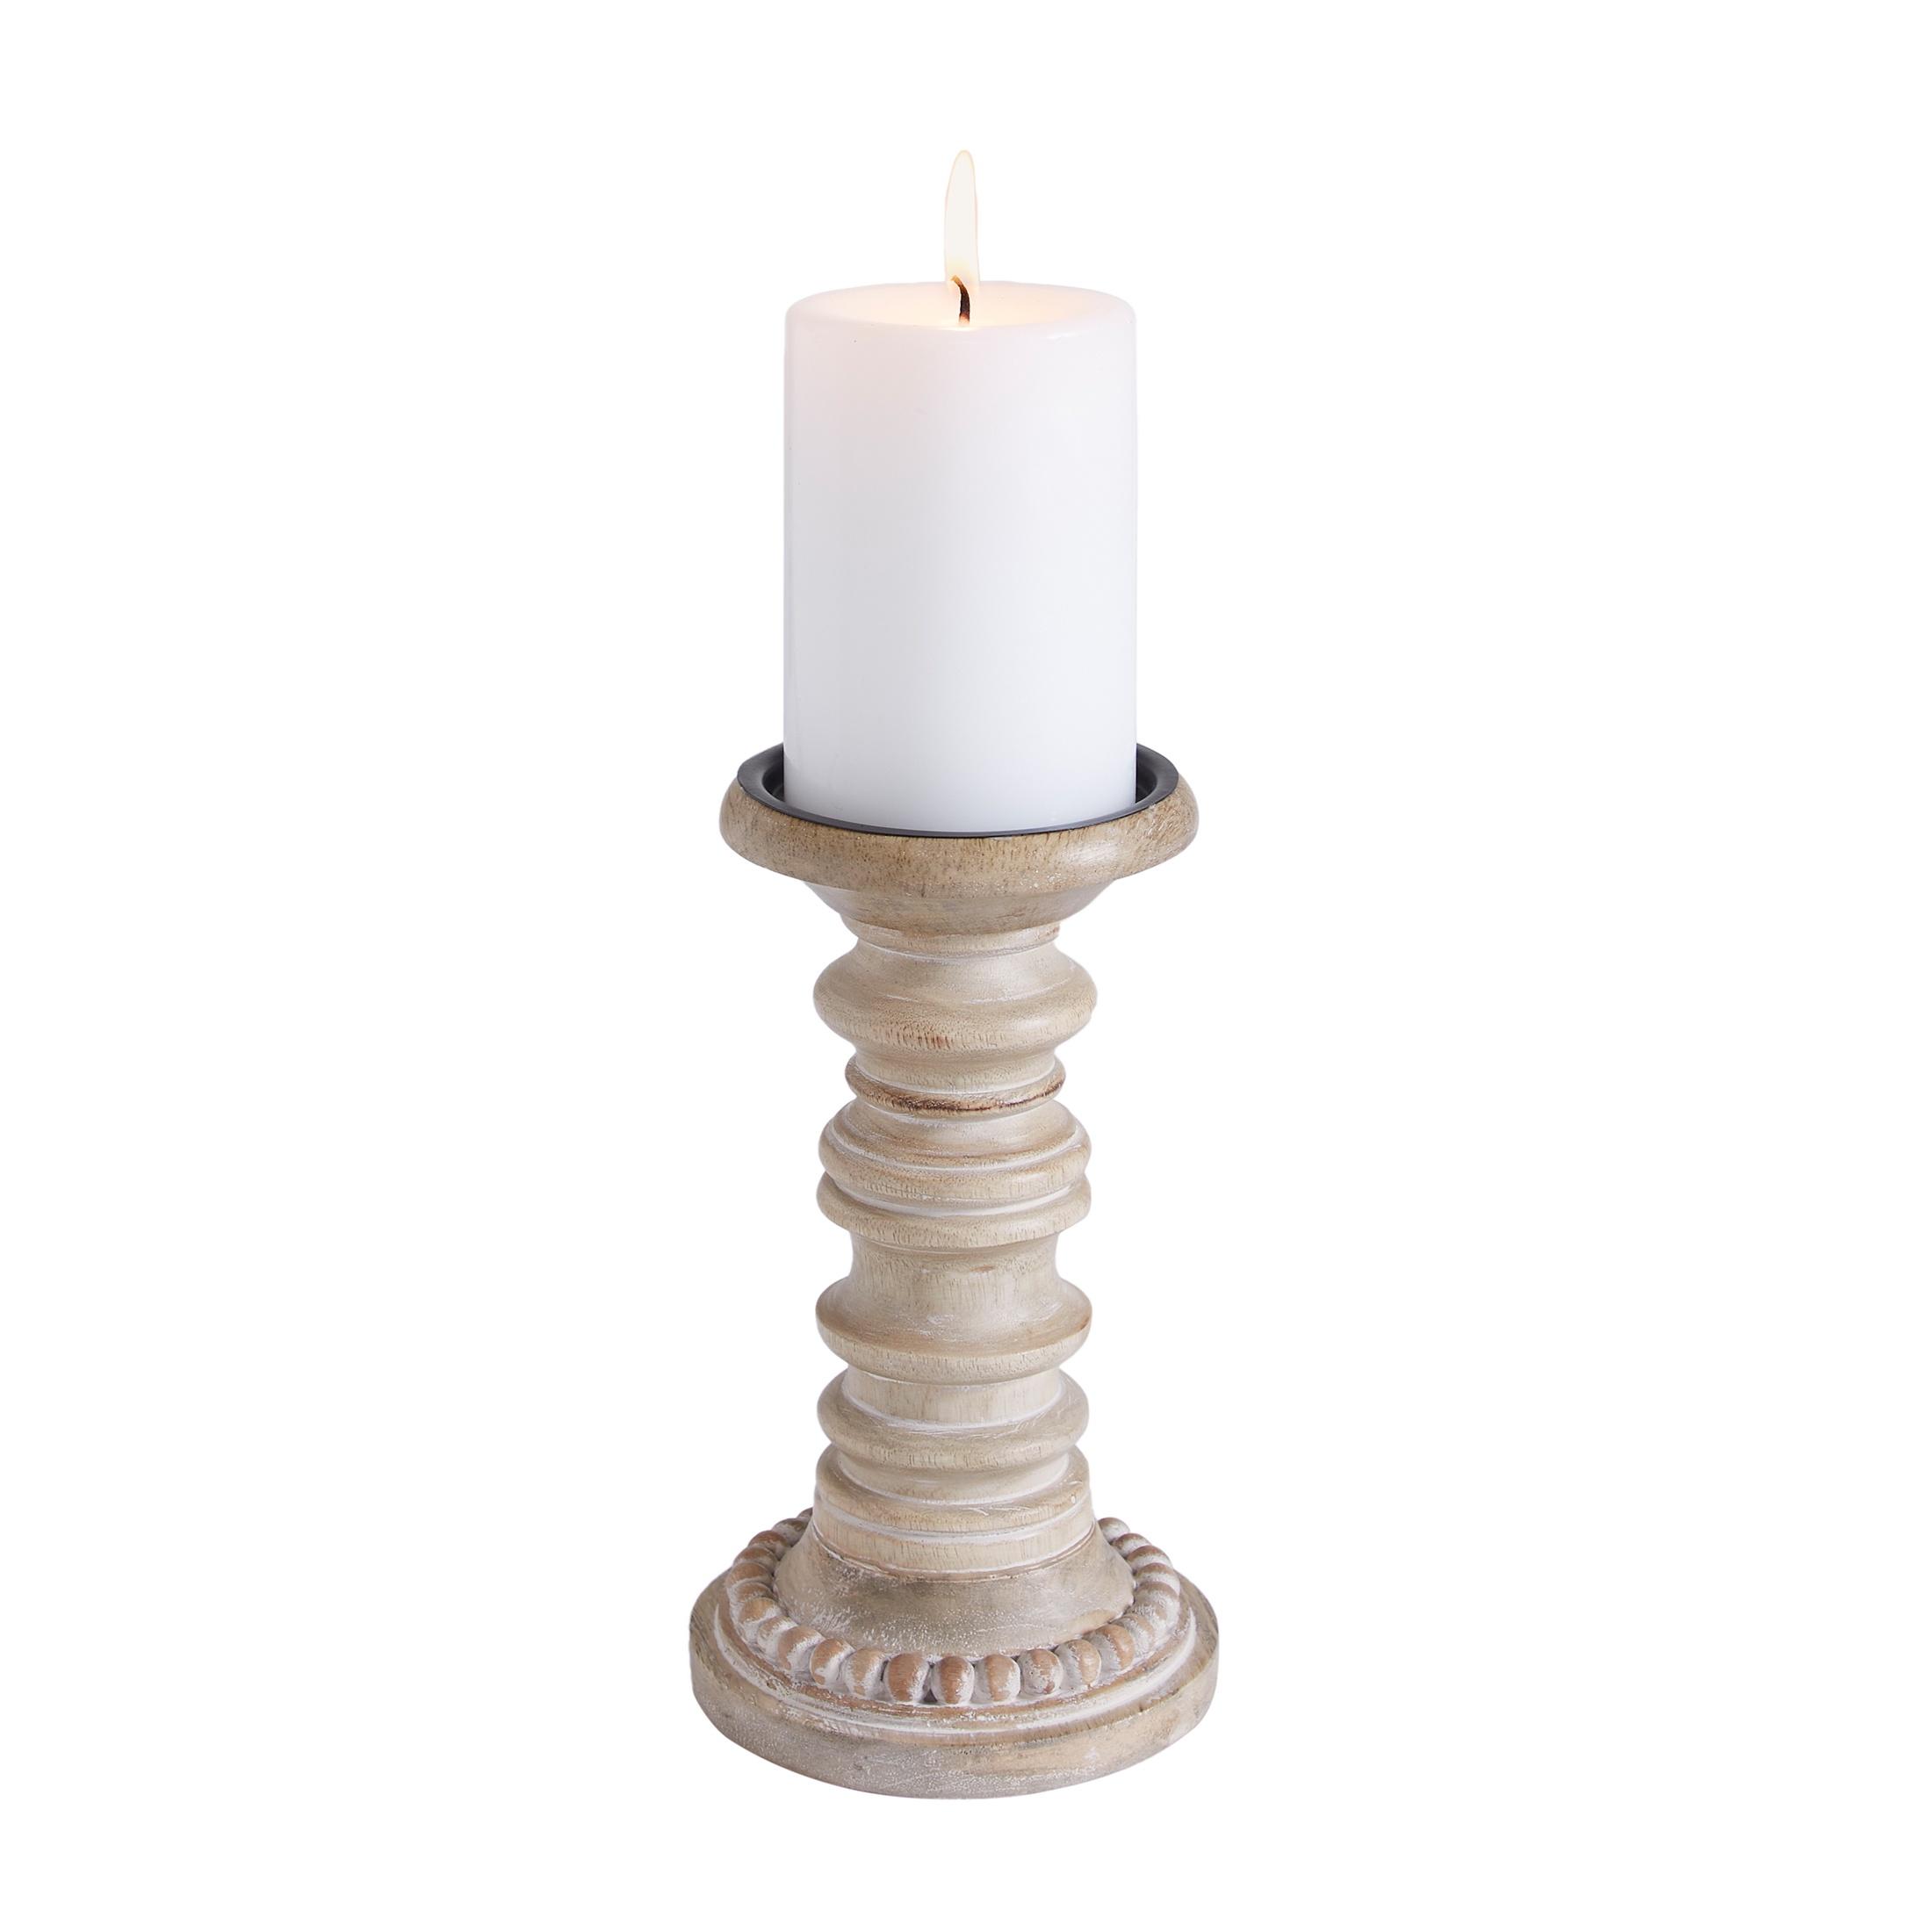 My Texas House Natural Mango Wood Pedestal Candle Holder, 8" Height - image 2 of 5